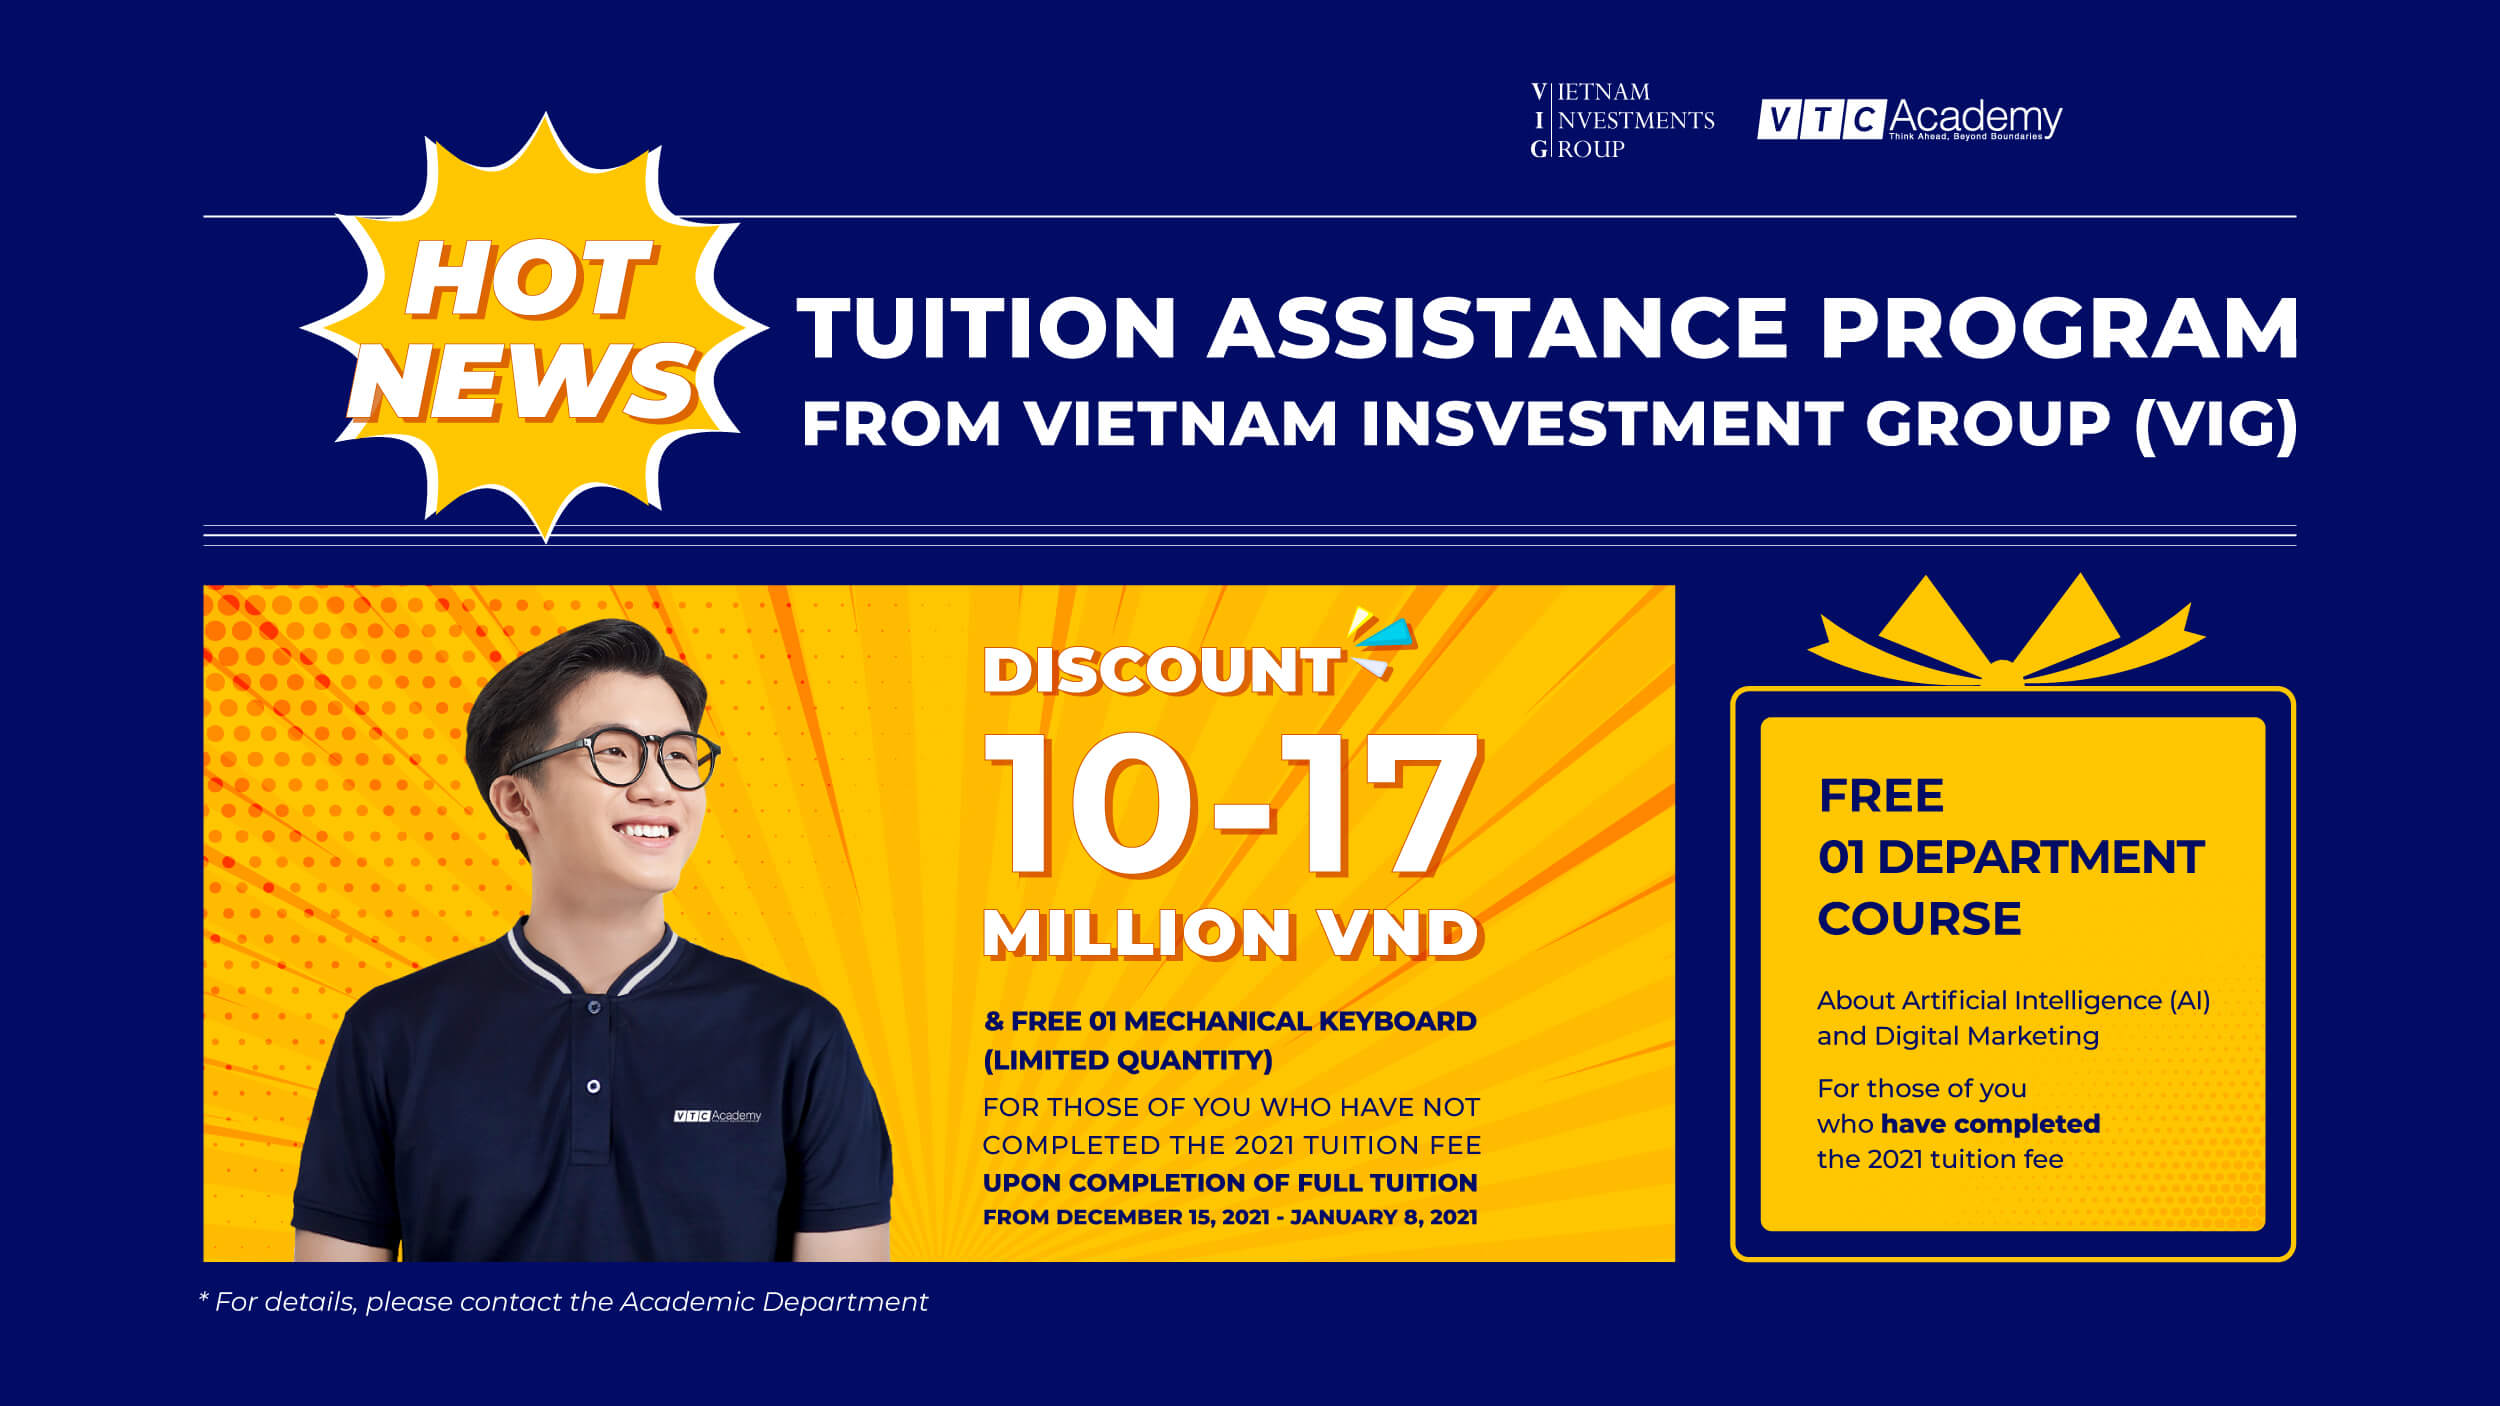 Vietnam Investments Group (VIG) travel with VTC Academy to support the school fee for students who have financial difficulties due to Covid-19 Pandemic